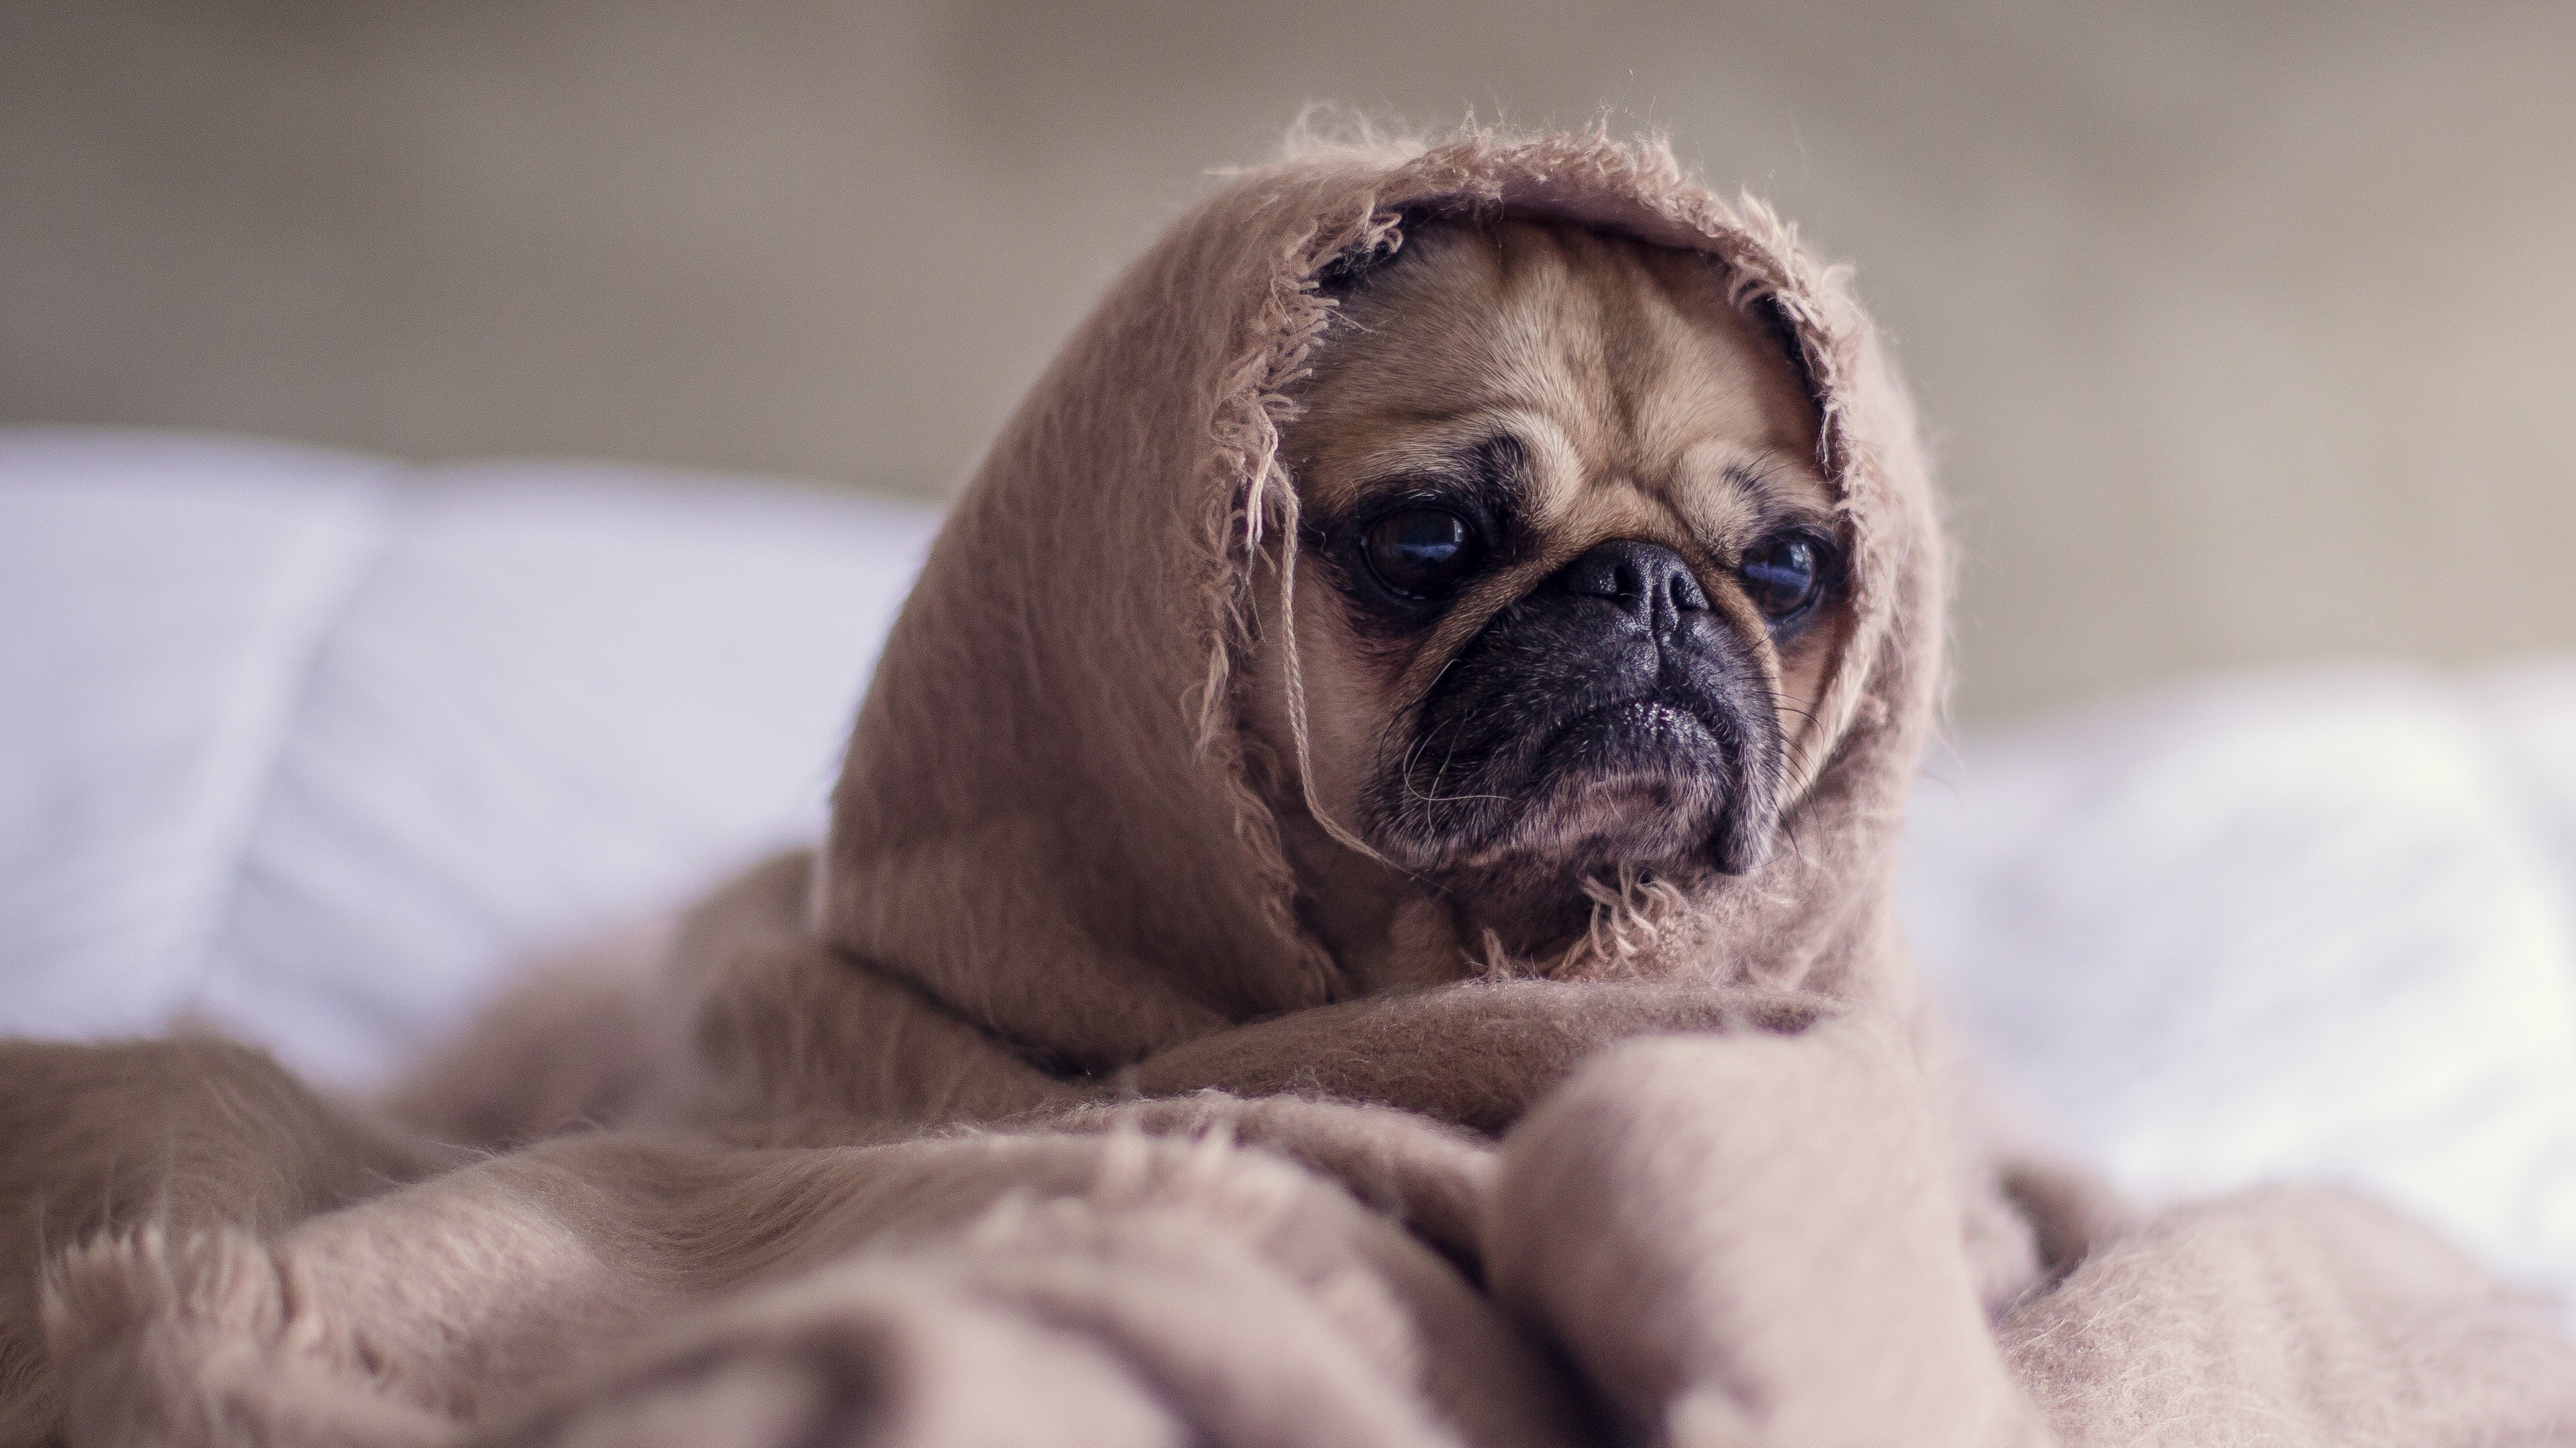 Funny Dog Puppy Wrapped In Blanket 4k Wallpaper 1407212 HD Wallpaper Backgrounds Download